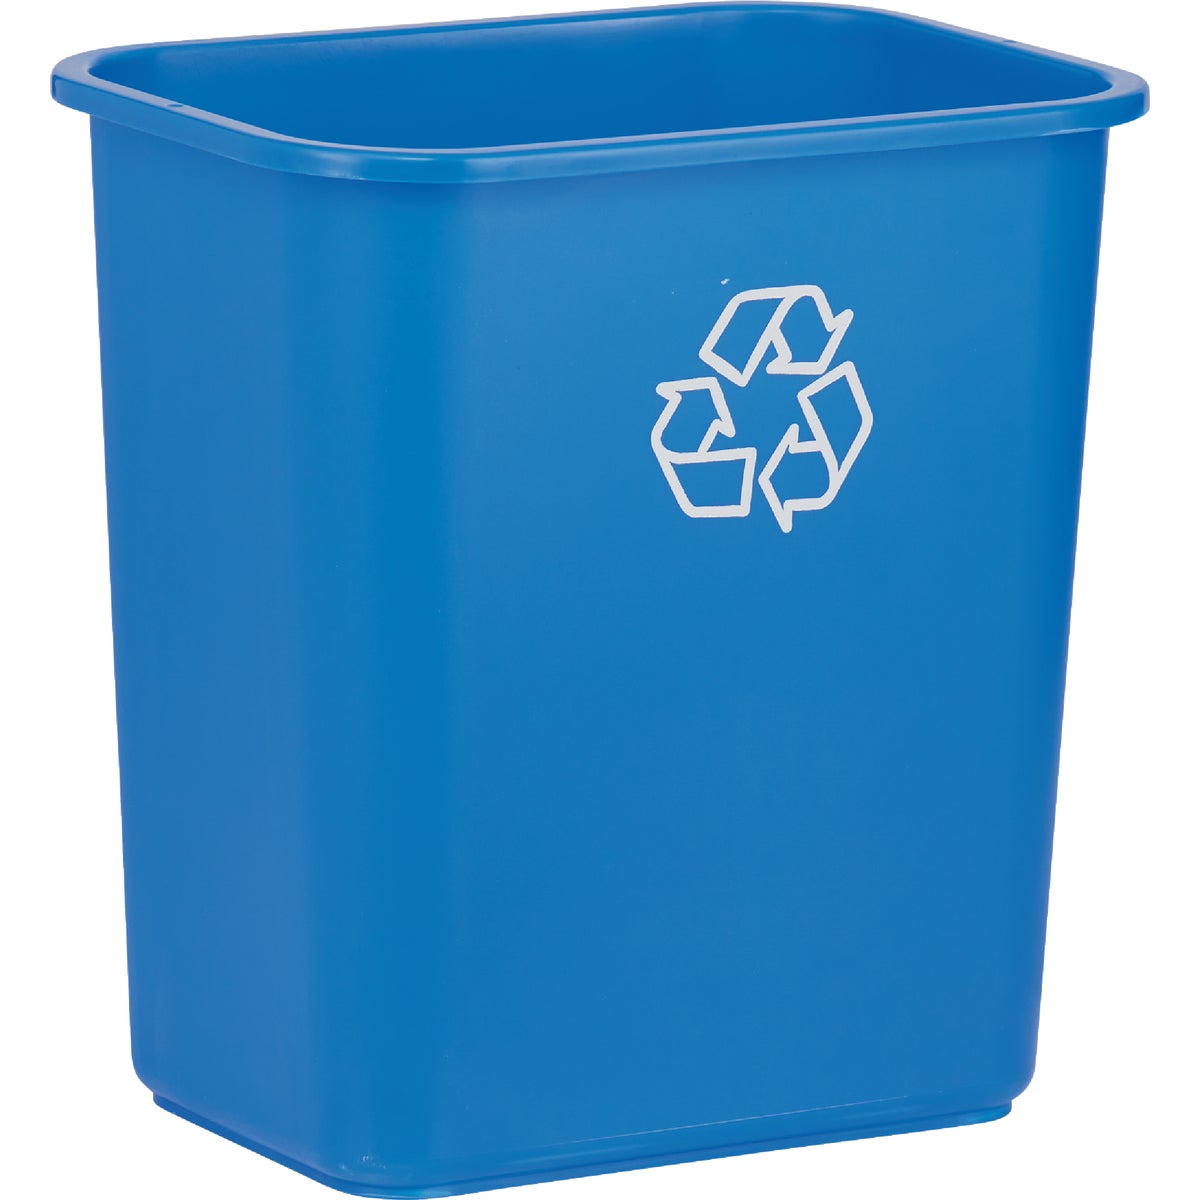 Item 602167, Recycling office wastebasket is the ideal size for under the desk or common